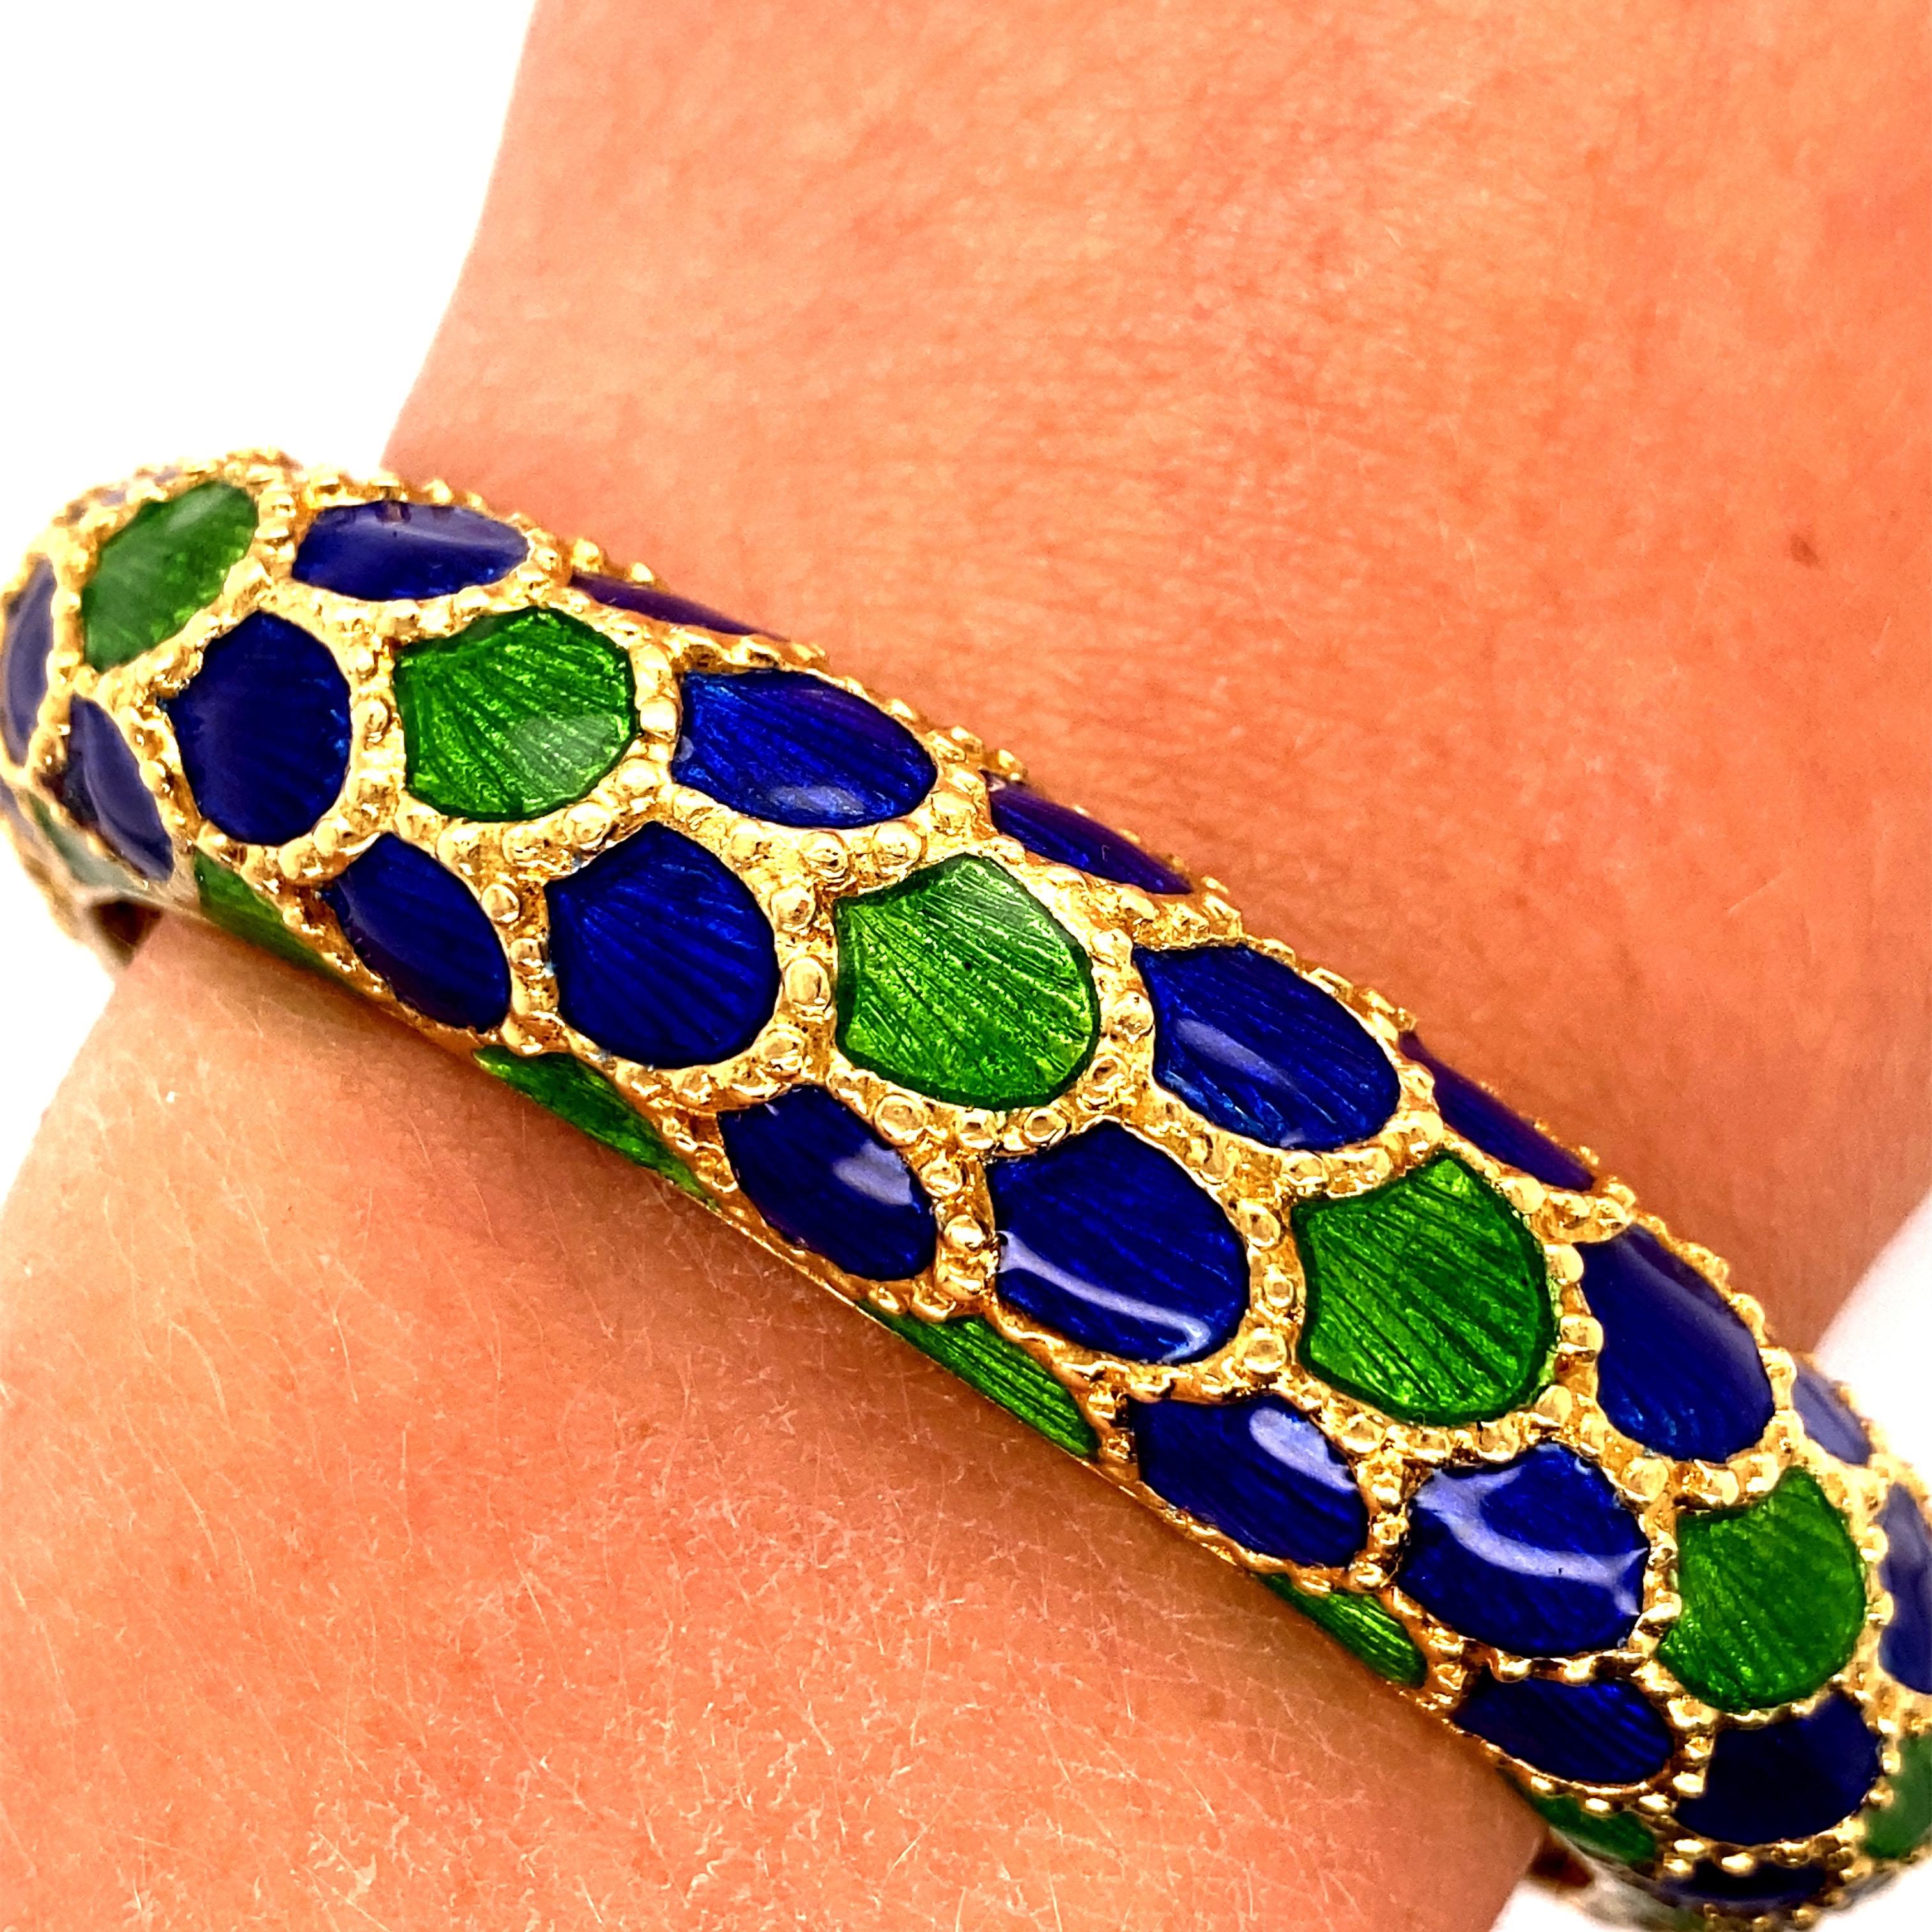 18K Yellow Gold Blue and Green Enamel Fishnet Bangle Bracelet - The width of the bangle is 14.5mm and the height off the wrist is 9mm. The inside diameter is 2 1/8 inches high and 2 3/8 inches wide. The bangle weighs 84.33 grams 